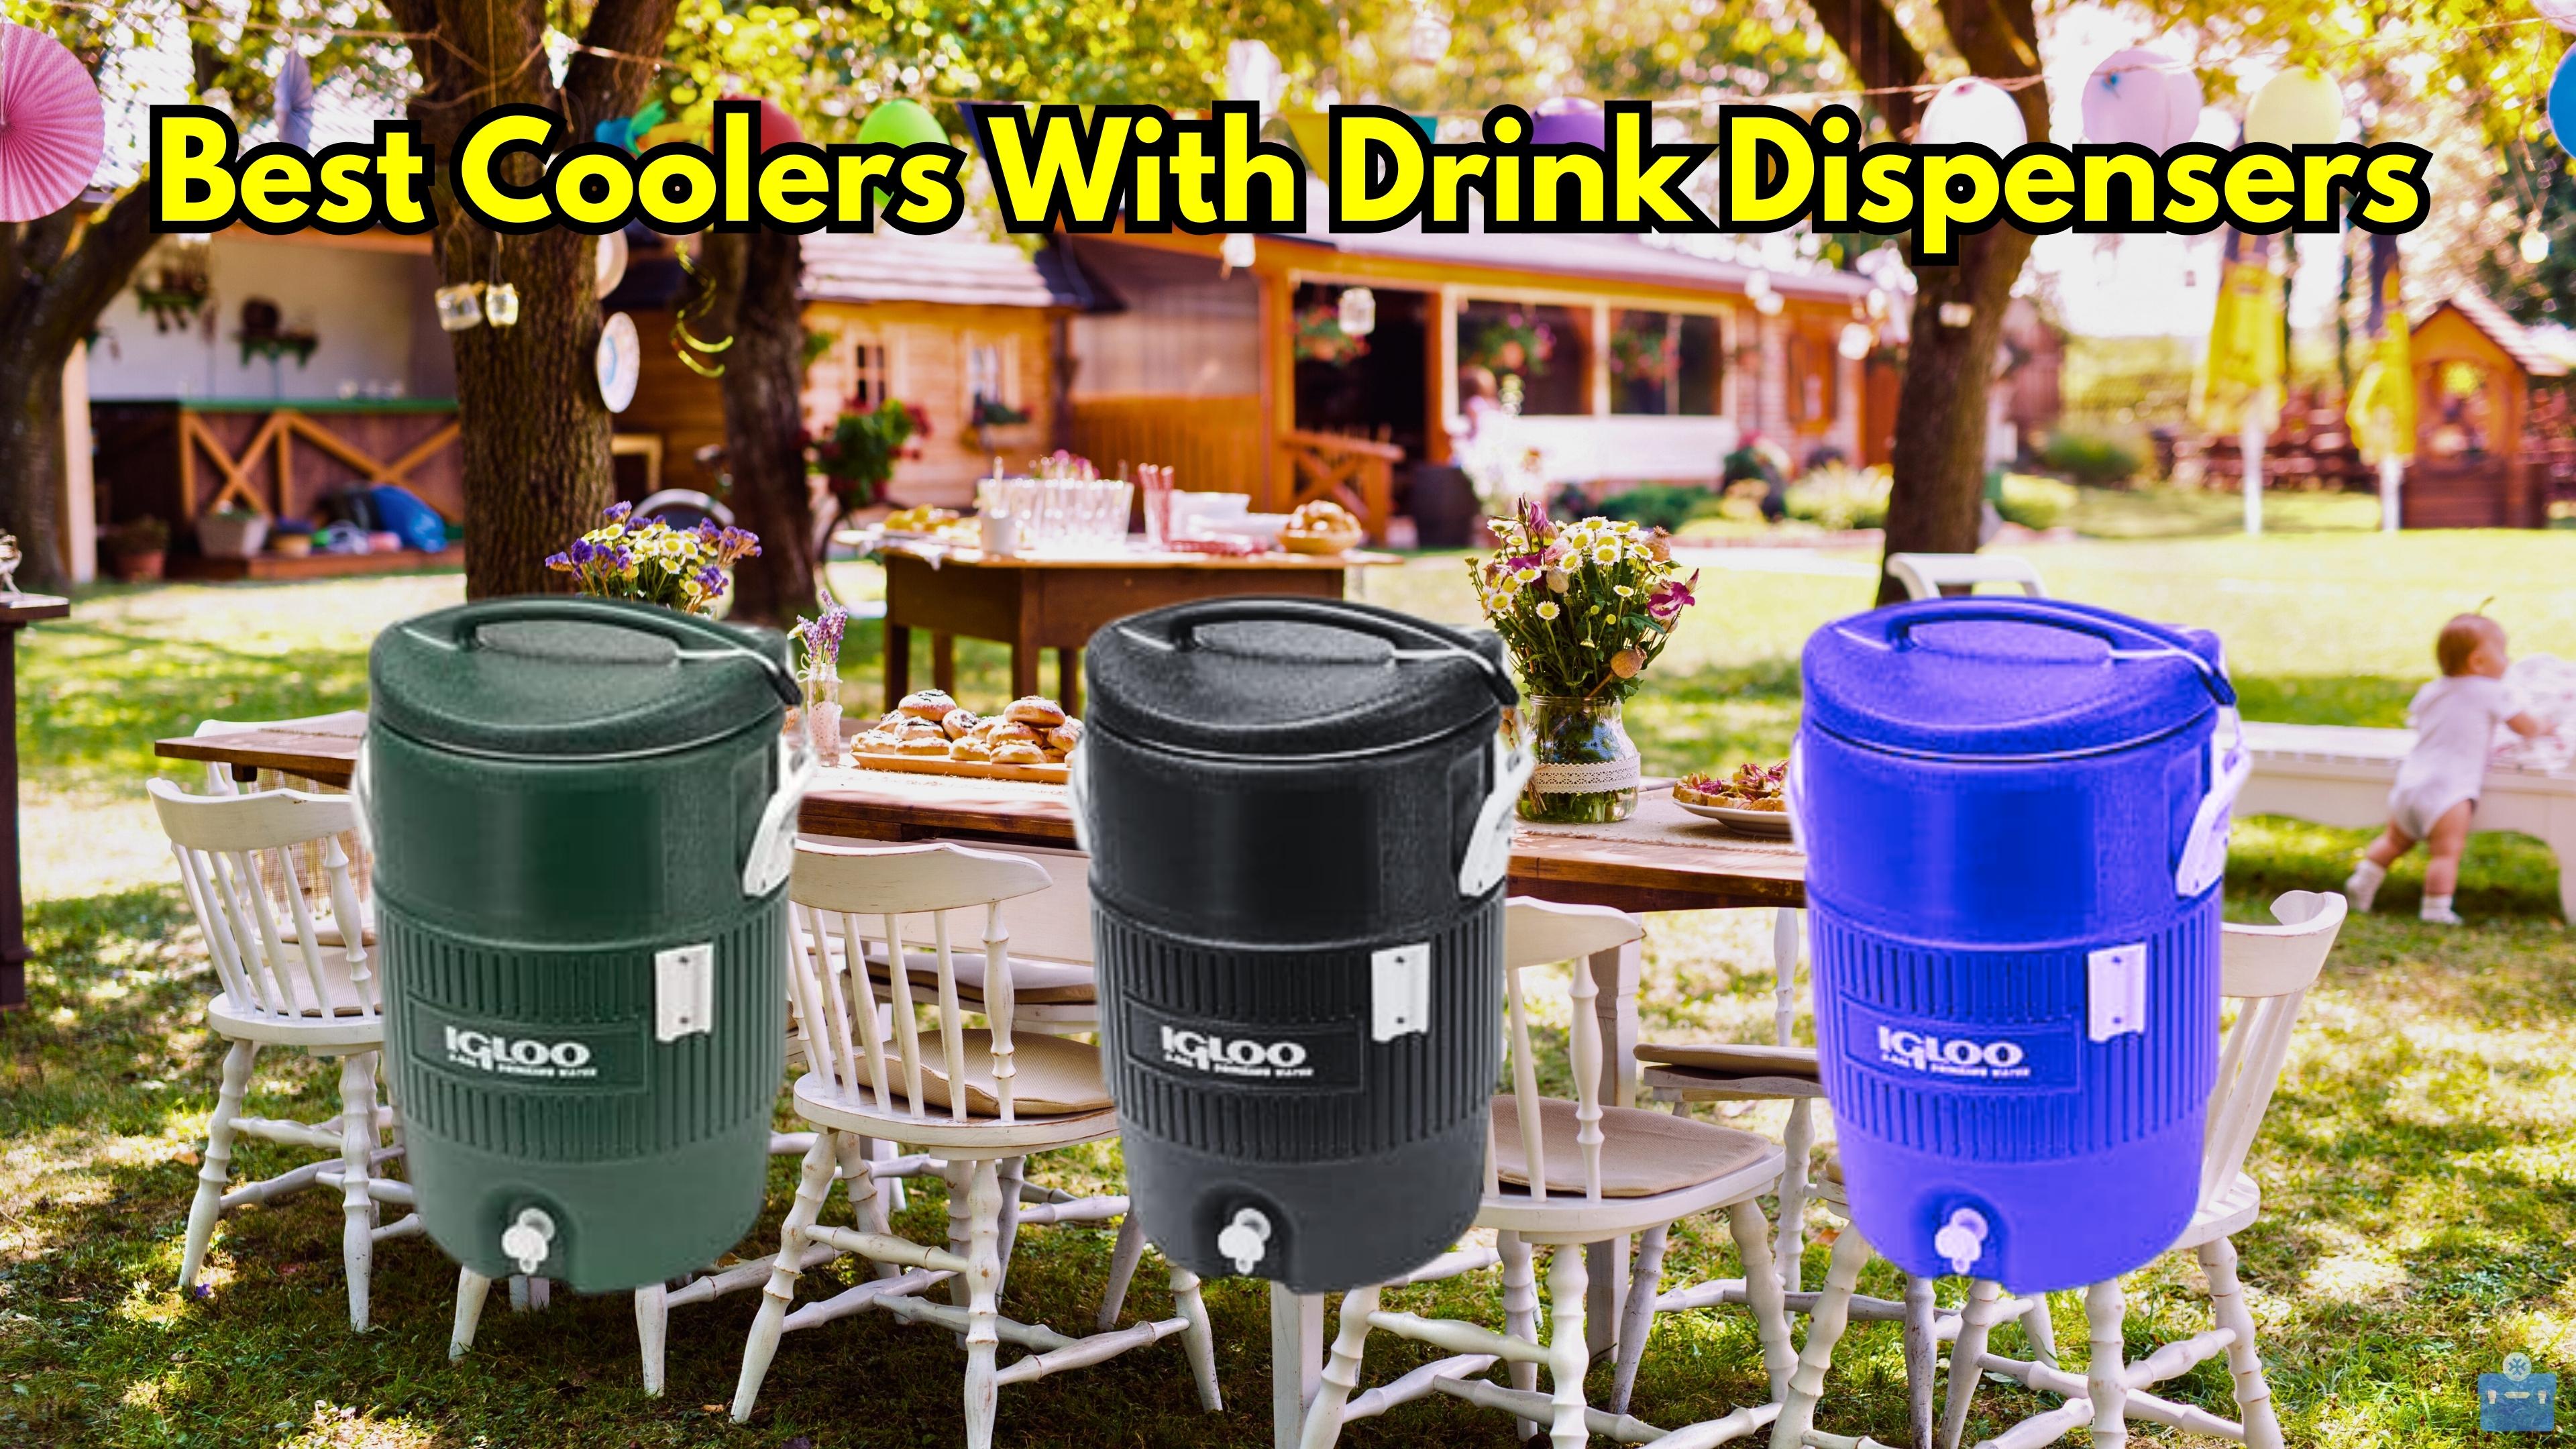 Best Coolers With Drink Dispensers: Top 5 Of 2023